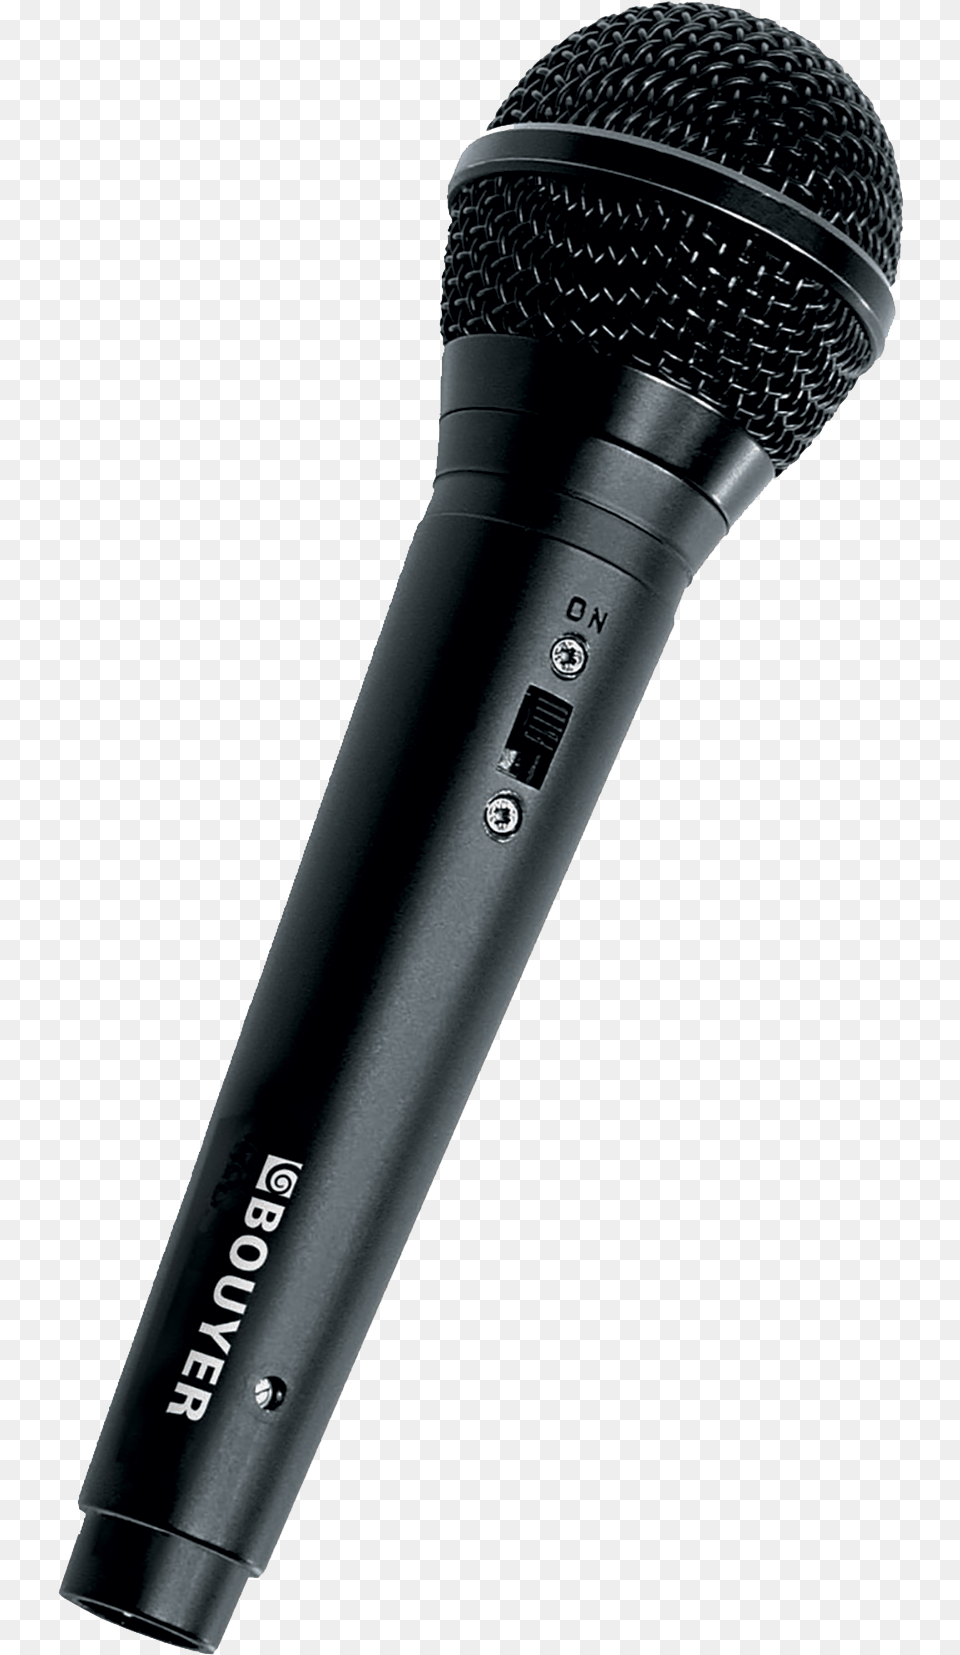 Hand Microphone Gm 820 Rde M1 S, Electrical Device Png